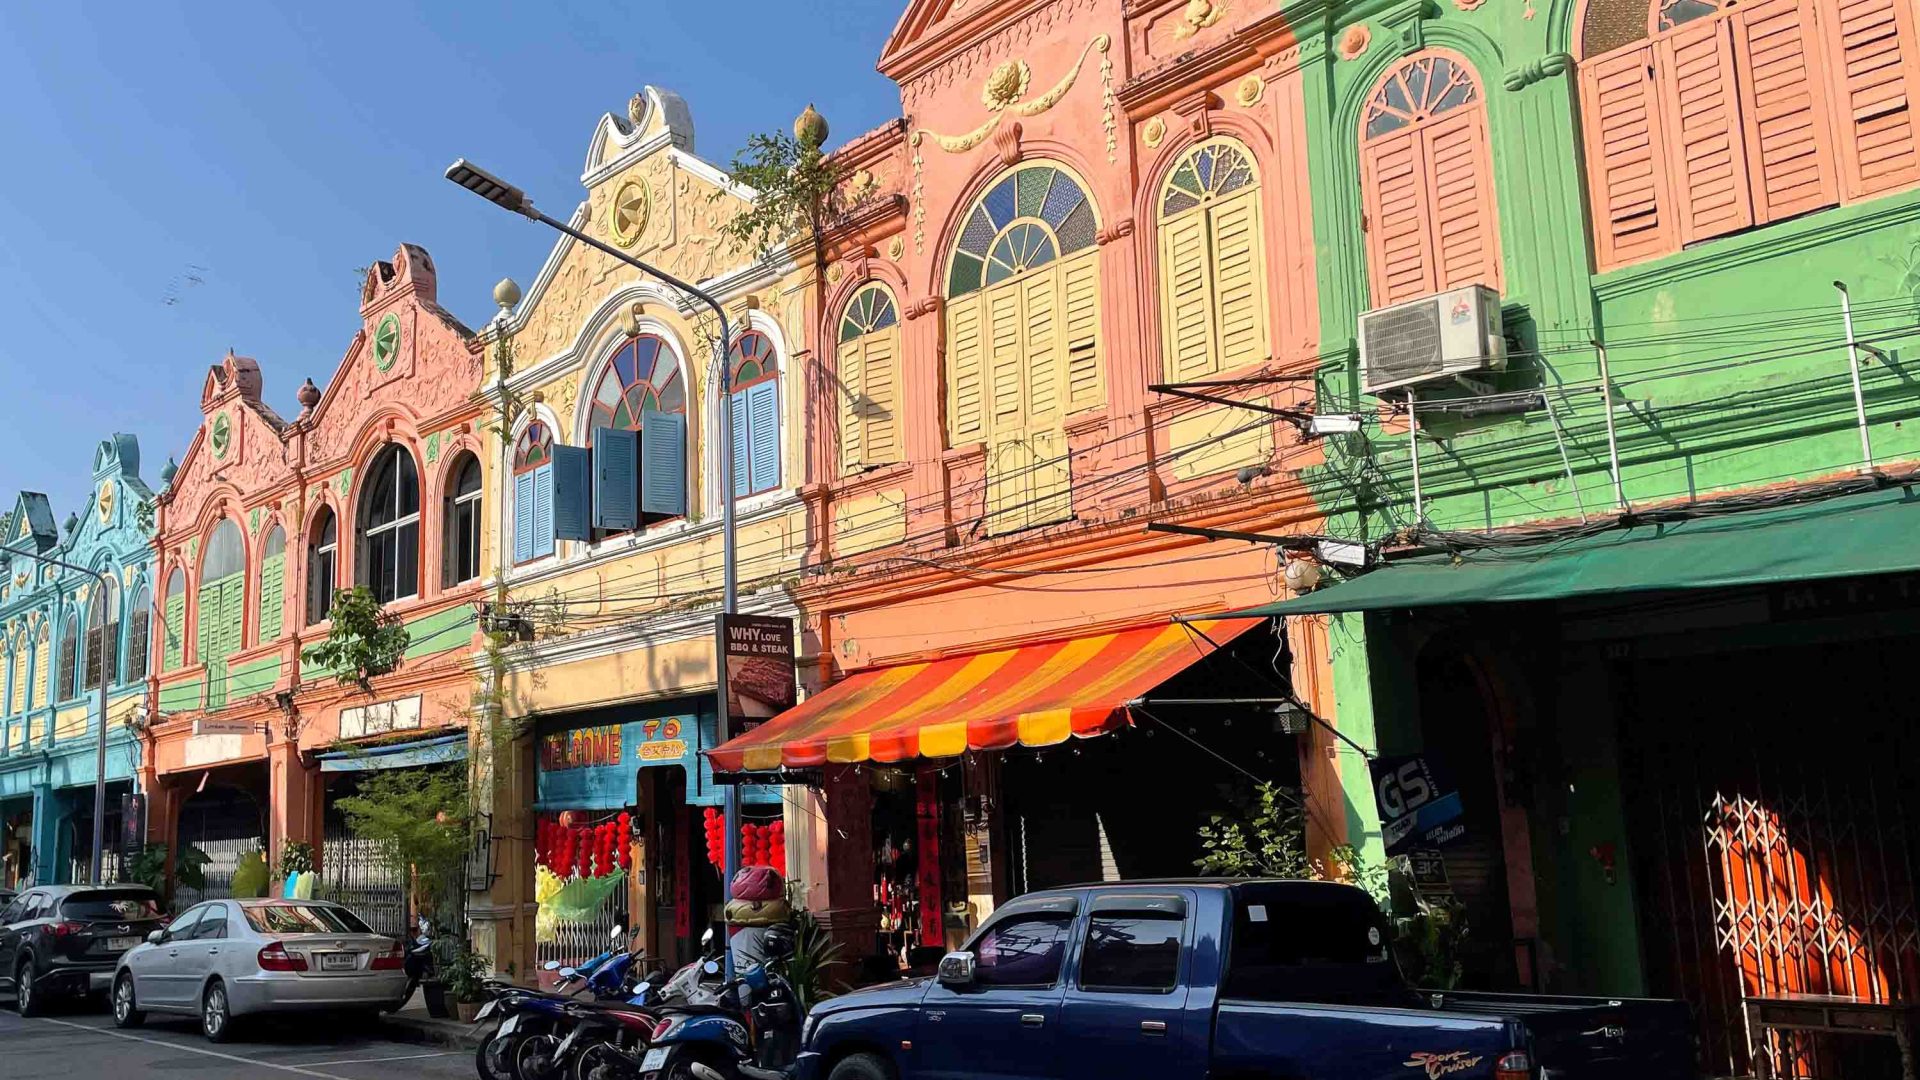 Colourful shops and houses line the street in Hat Yai.